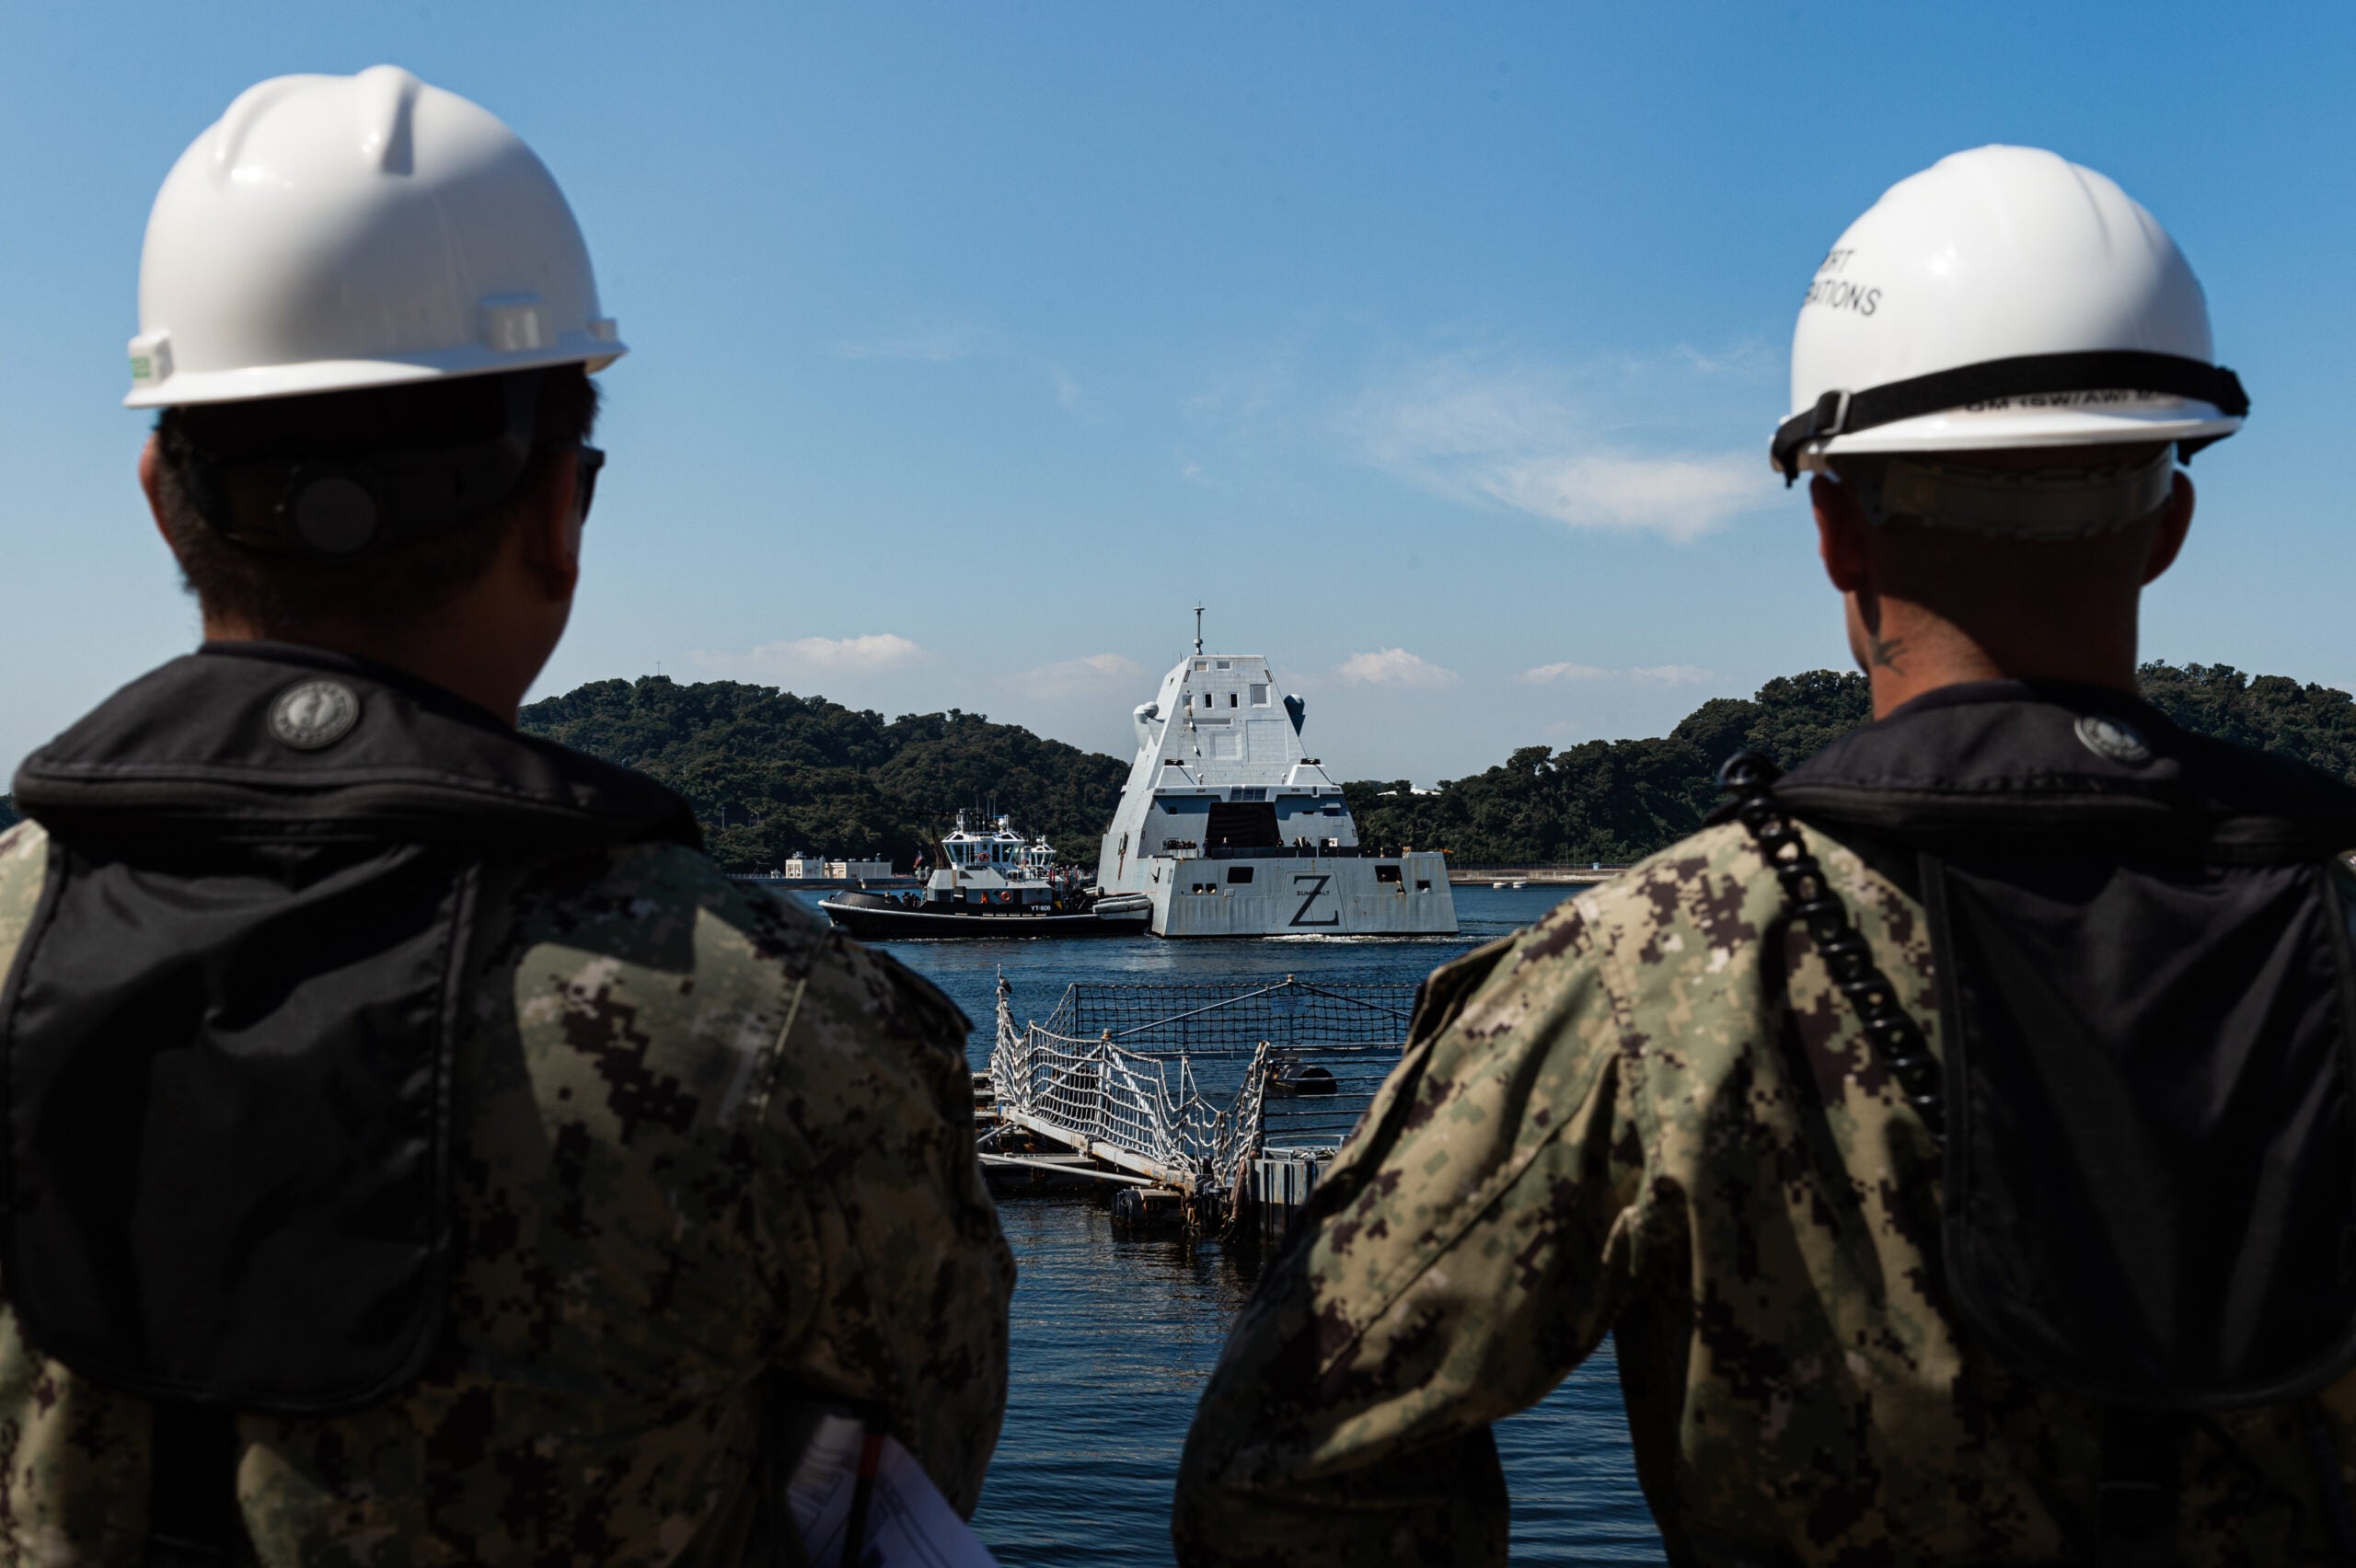 YOKOSUKA, Japan (Sept. 26, 2022) Operations Specialist 2nd Class Kitowel Flores and Quartermaster 2nd Class Milo Mai assigned to Commander, Fleet Activities Yokosuka (CFAY) Port Operations, communicate with harbor tugs escorting the Zumwalt-class guided-missile destroyer USS Zumwalt (DDG 1000) For more than 75 years, CFAY has provided, maintained, and operated base facilities and services in support of the U.S. 7th Fleet's forward deployed naval forces, tenant commands, and thousands of military and civilian personnel and their families. (U.S Navy photo by Seaman Darren Cordoviz)